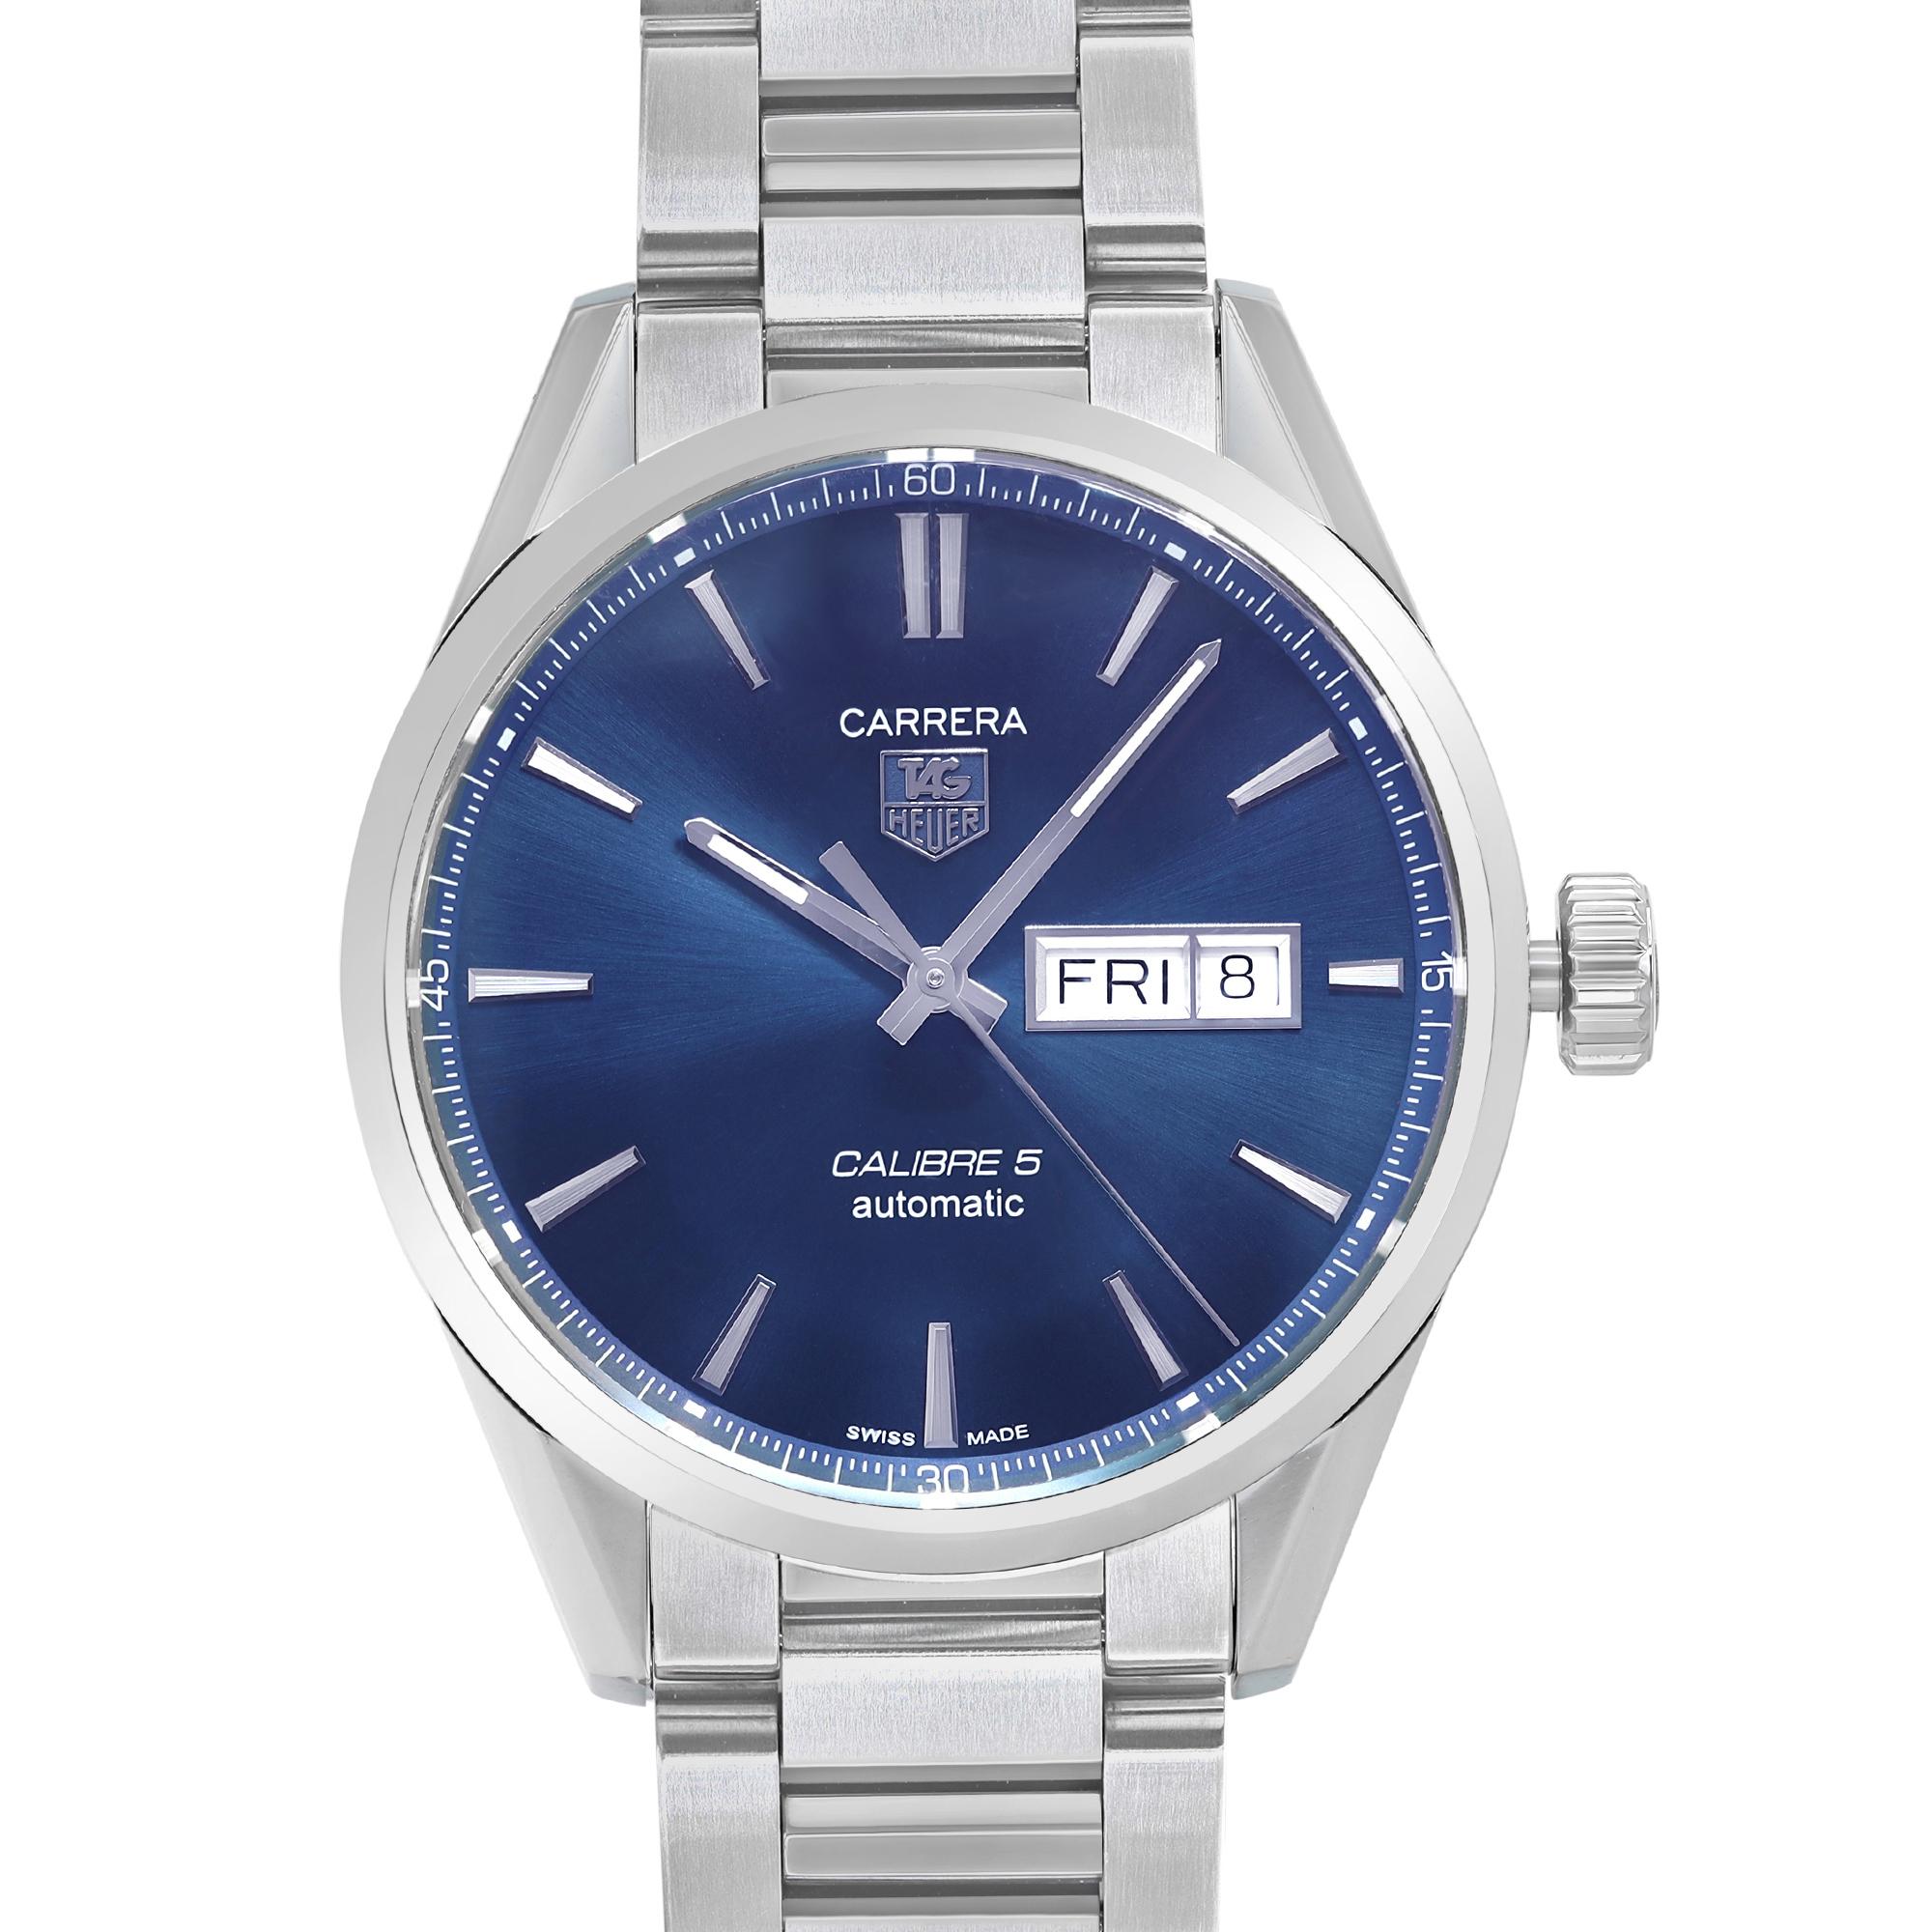 Unworn TAG Heuer Carrera 41mm Day-Date Steel Case Blue Dial Automatic Men's Watch WAR201E.BA0723 This Beautiful Timepiece is powered by a Mechanical (Automatic) Movement and Features: A Polished Stainless Steel Case and Bracelet with a fold-over